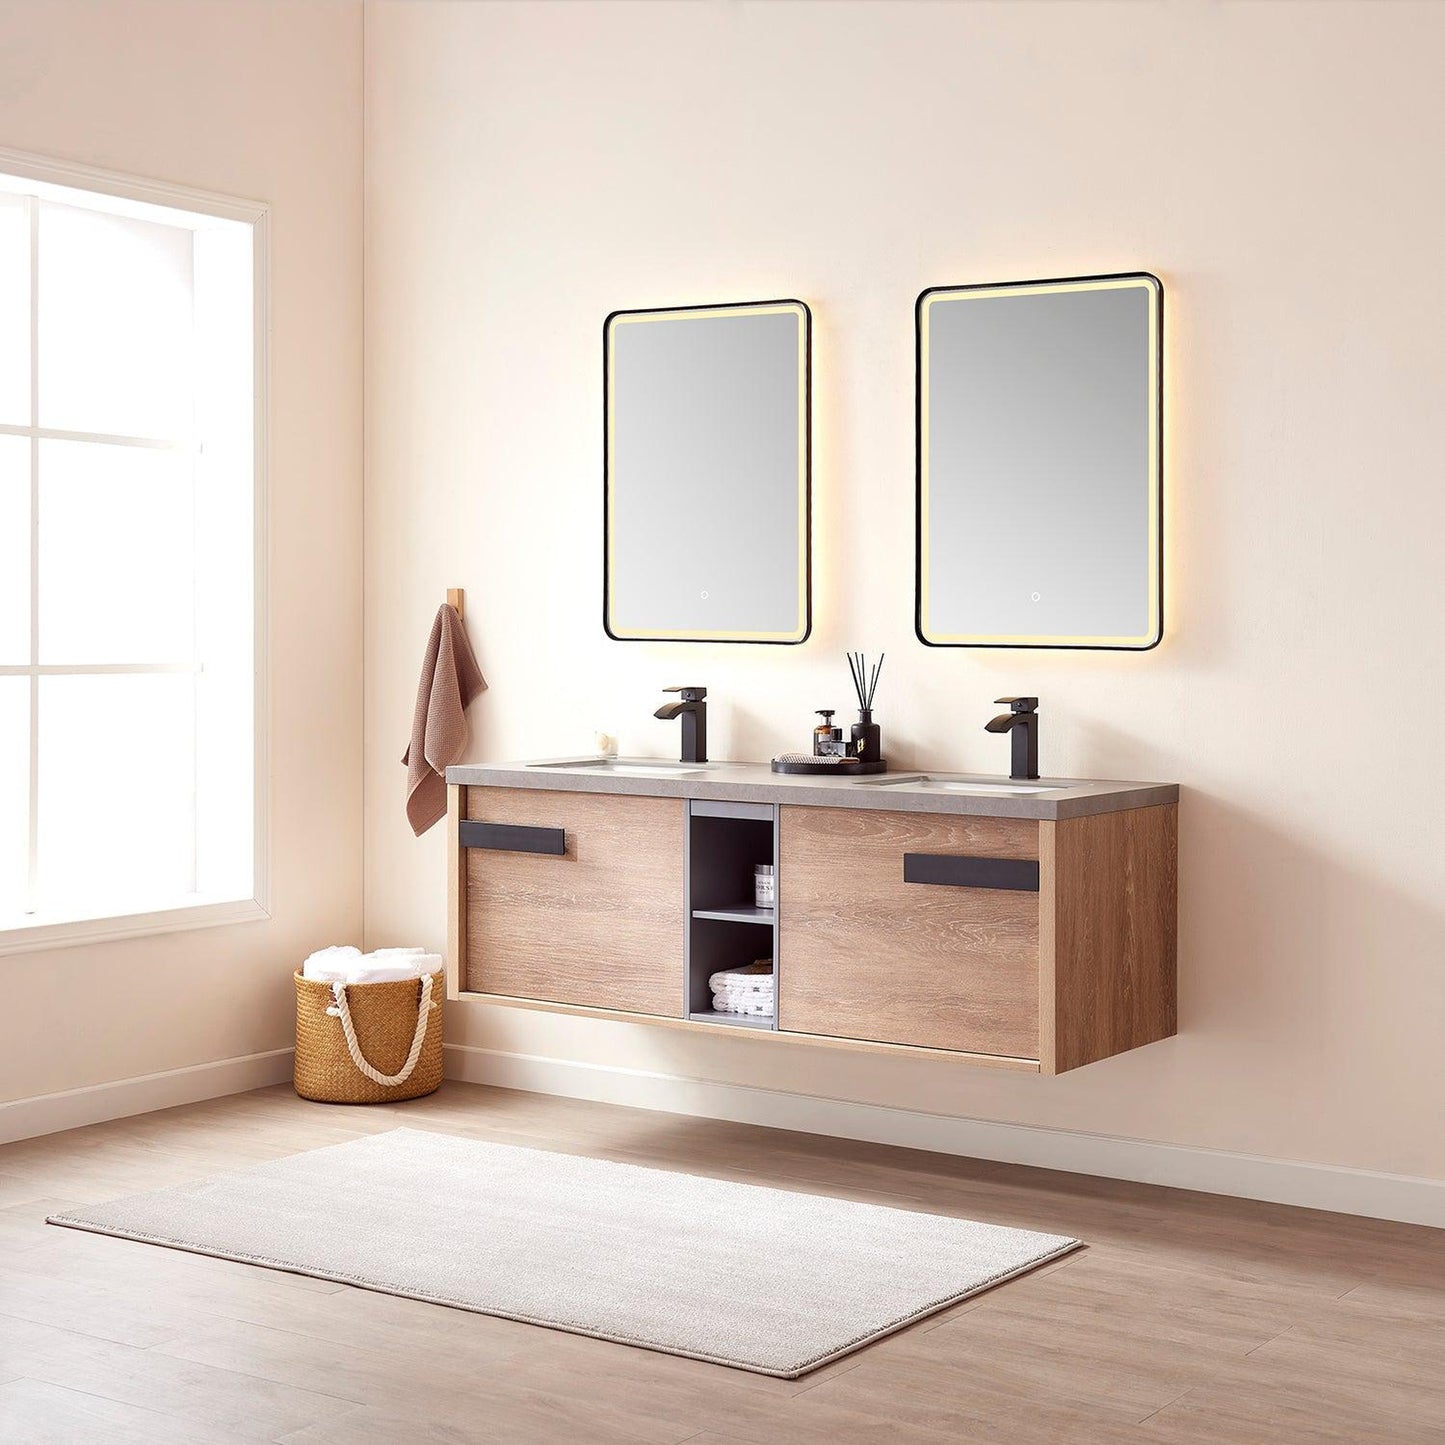 Vinnova Carcastillo 63" Double Sink Bath Vanity In North American Oak And Matte Black Hardware Finish With Grey Sintered Stone Top And Mirror